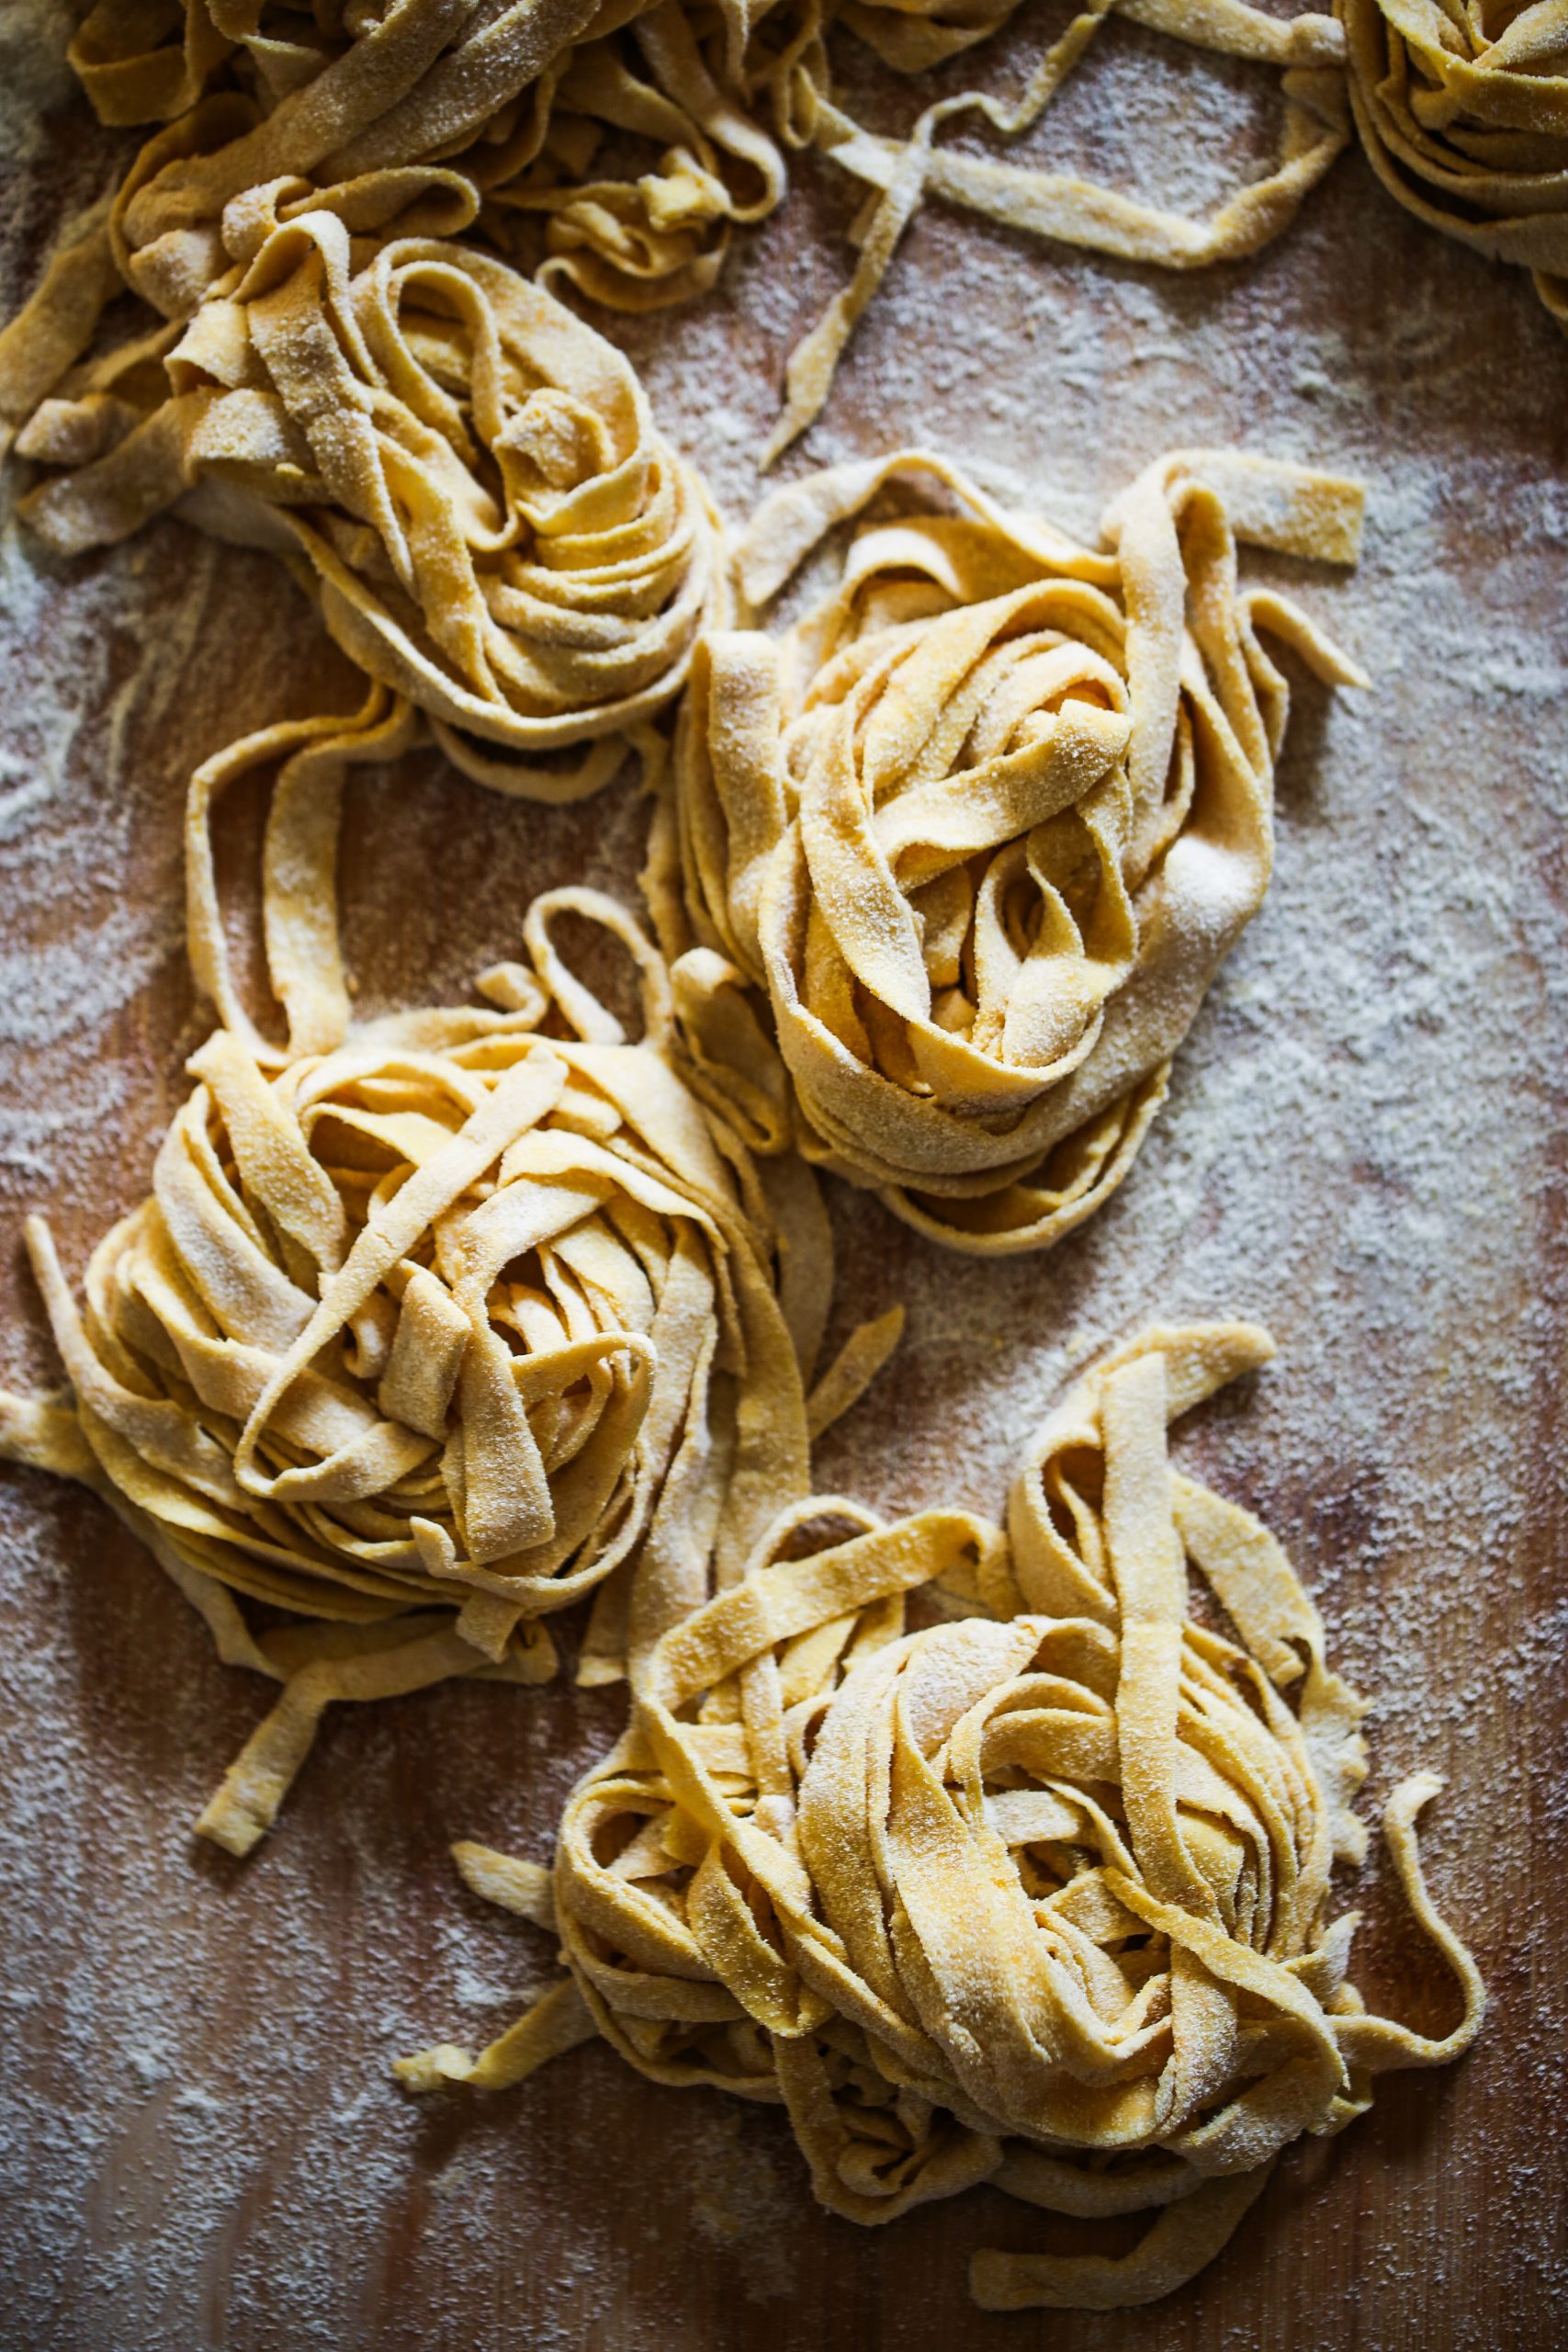 If you're looking for a challenge in the kitchen, look no further. Everybody loves pasta, and while shop-bought varieties are delicious, making your own Italian pasta dough will make your meal that bit more special.